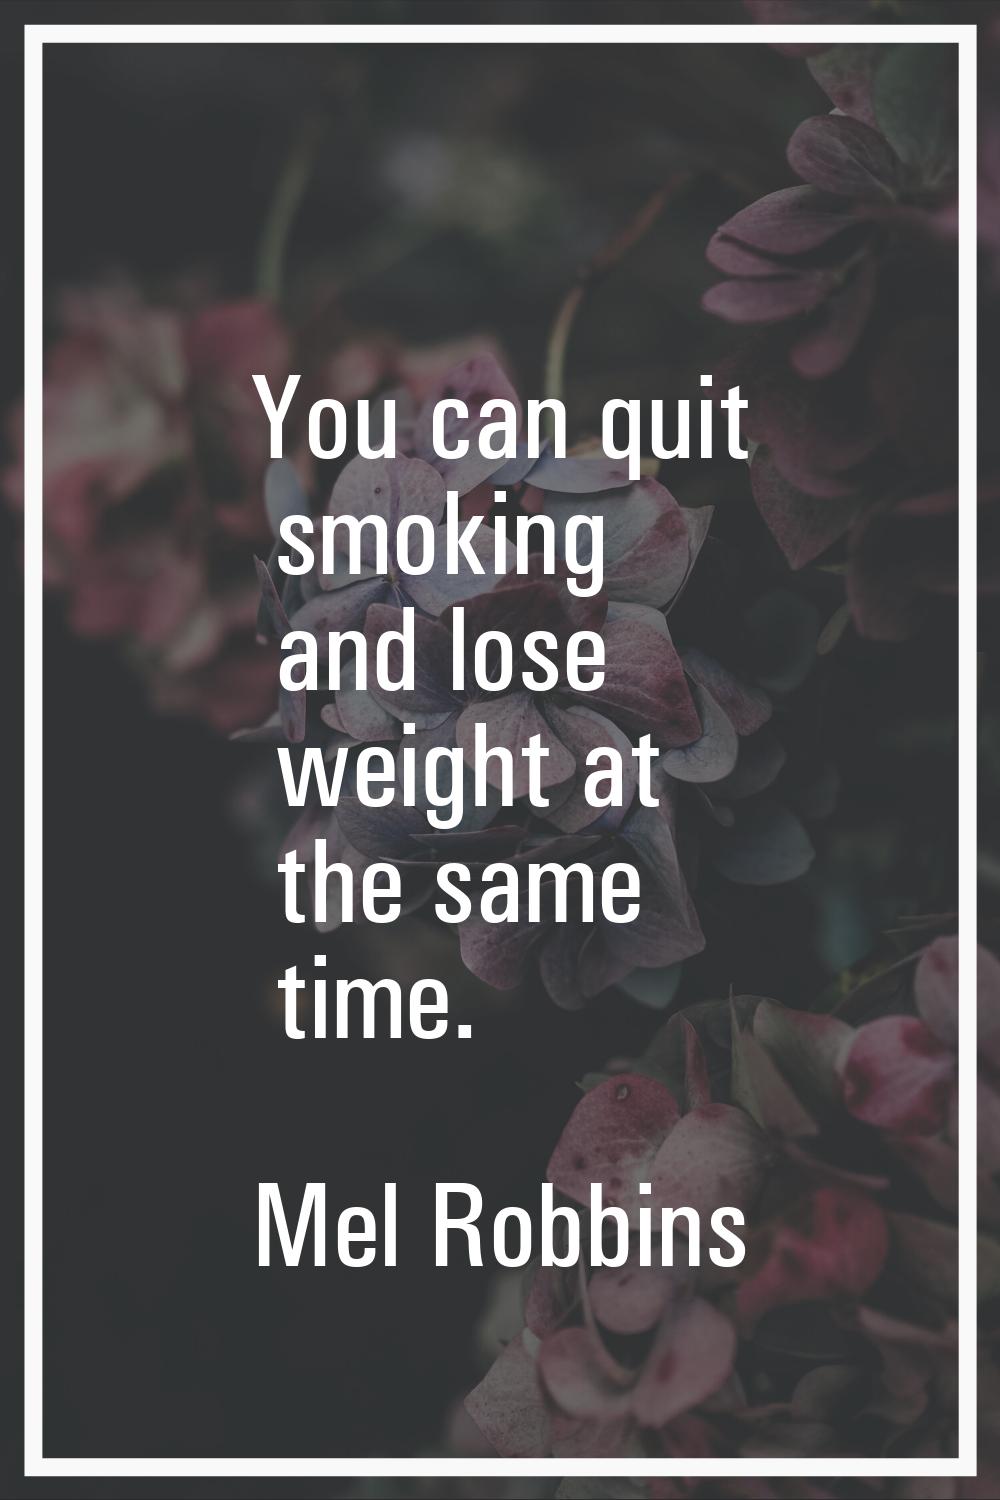 You can quit smoking and lose weight at the same time.